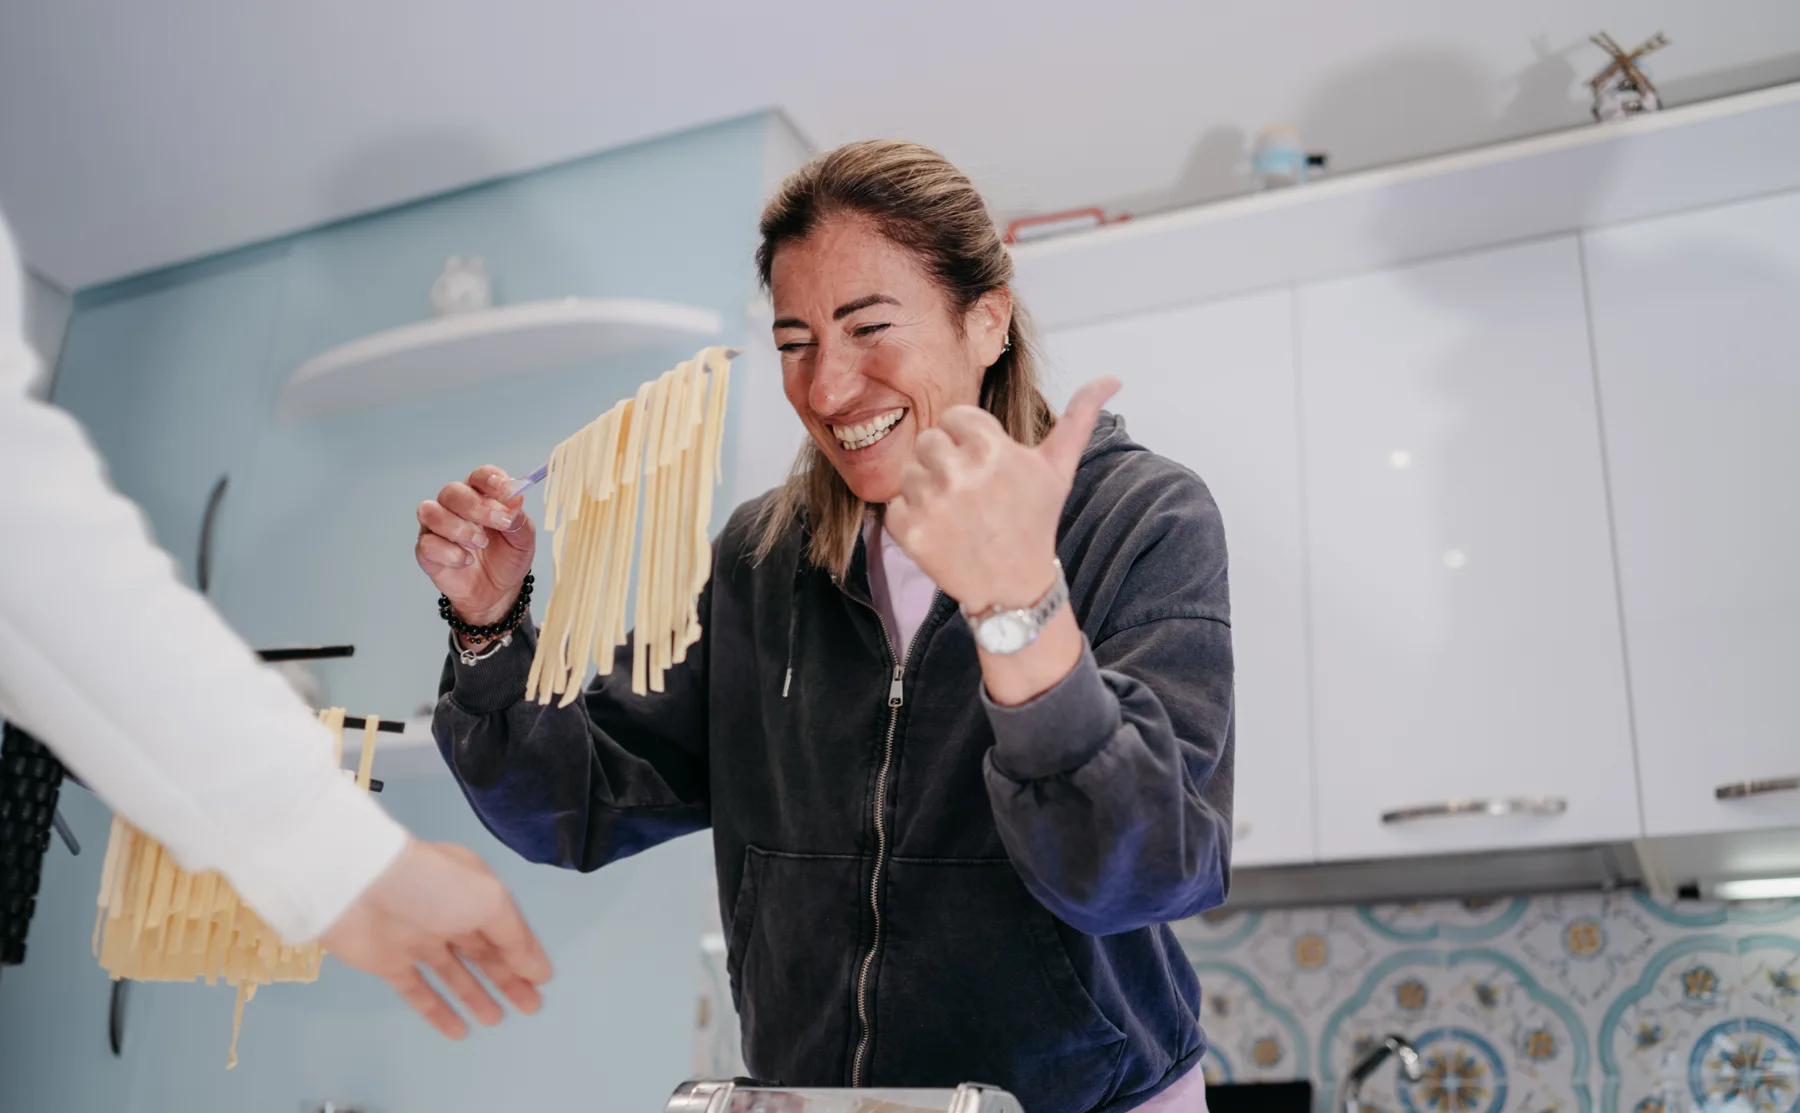 Learn To Make Fresh Pasta With Love - 1558367